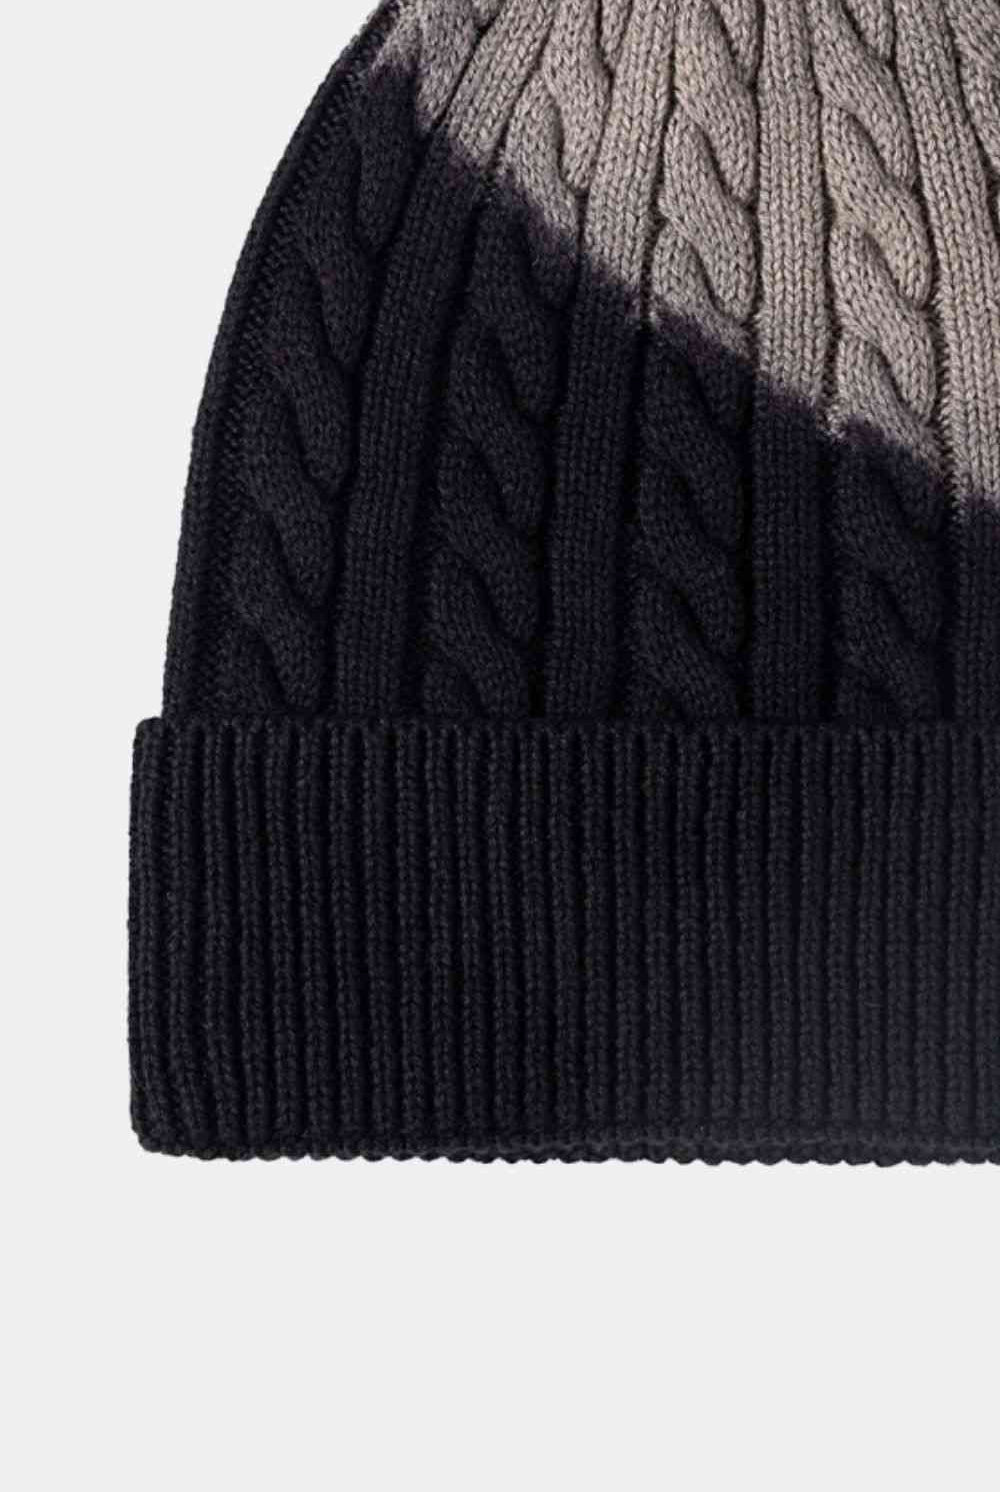 Black Contrast Tie-Dye Cable-Knit Cuffed Beanie Winter Accessories